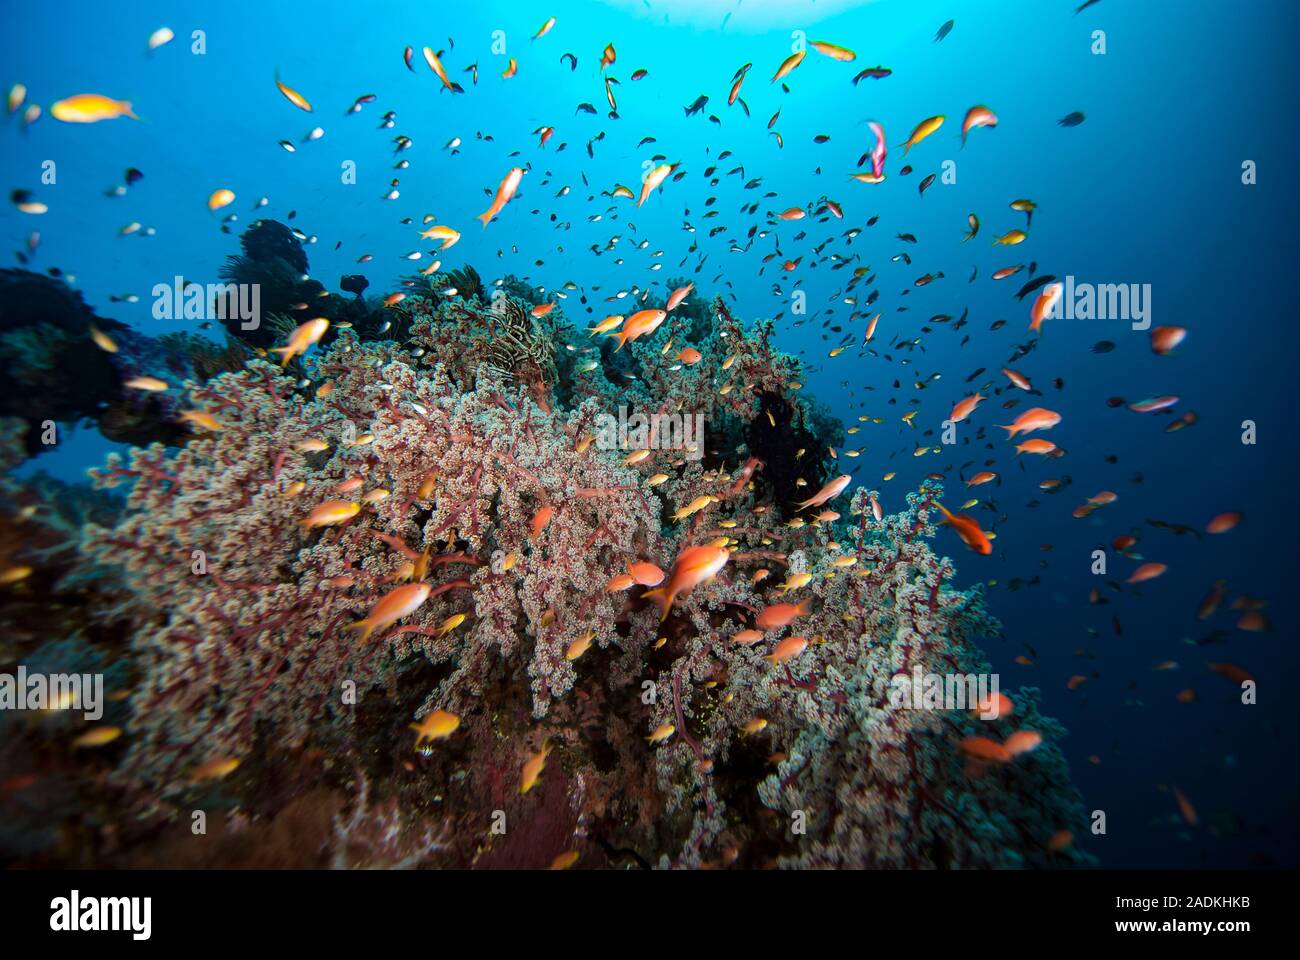 Underwater Tropical Coral Reef Stock Photo